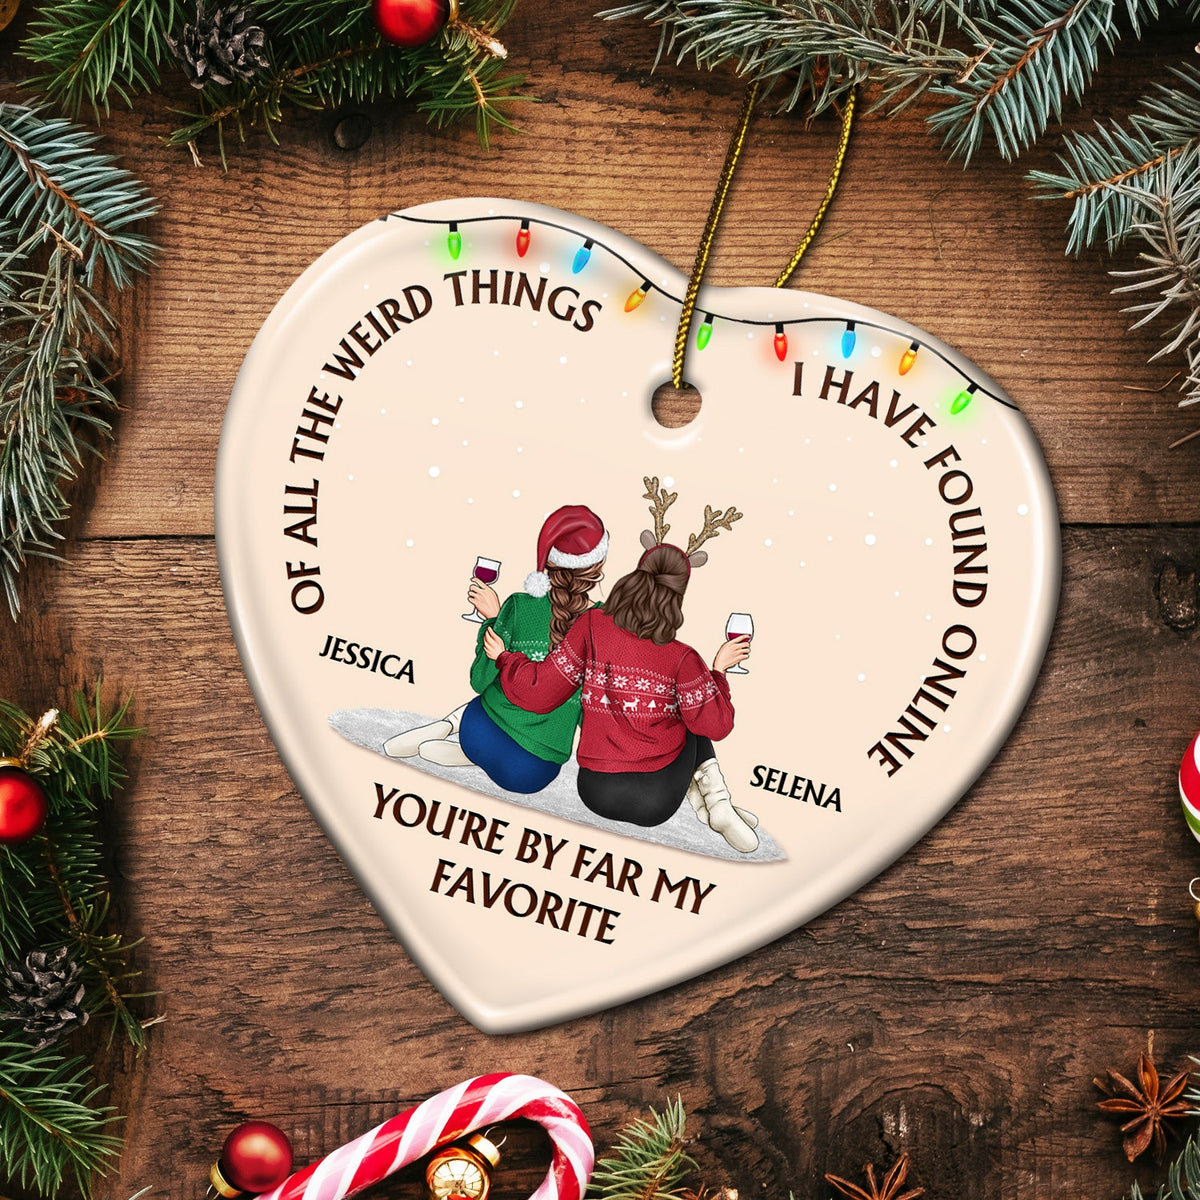  Custom of All The Weird Things I Have Found Online You're by  Far My Favorite Ornament Husband Wife Ornament Christmas Tree Decor Xmas  for Wife Woman Him Her Gift for Couple